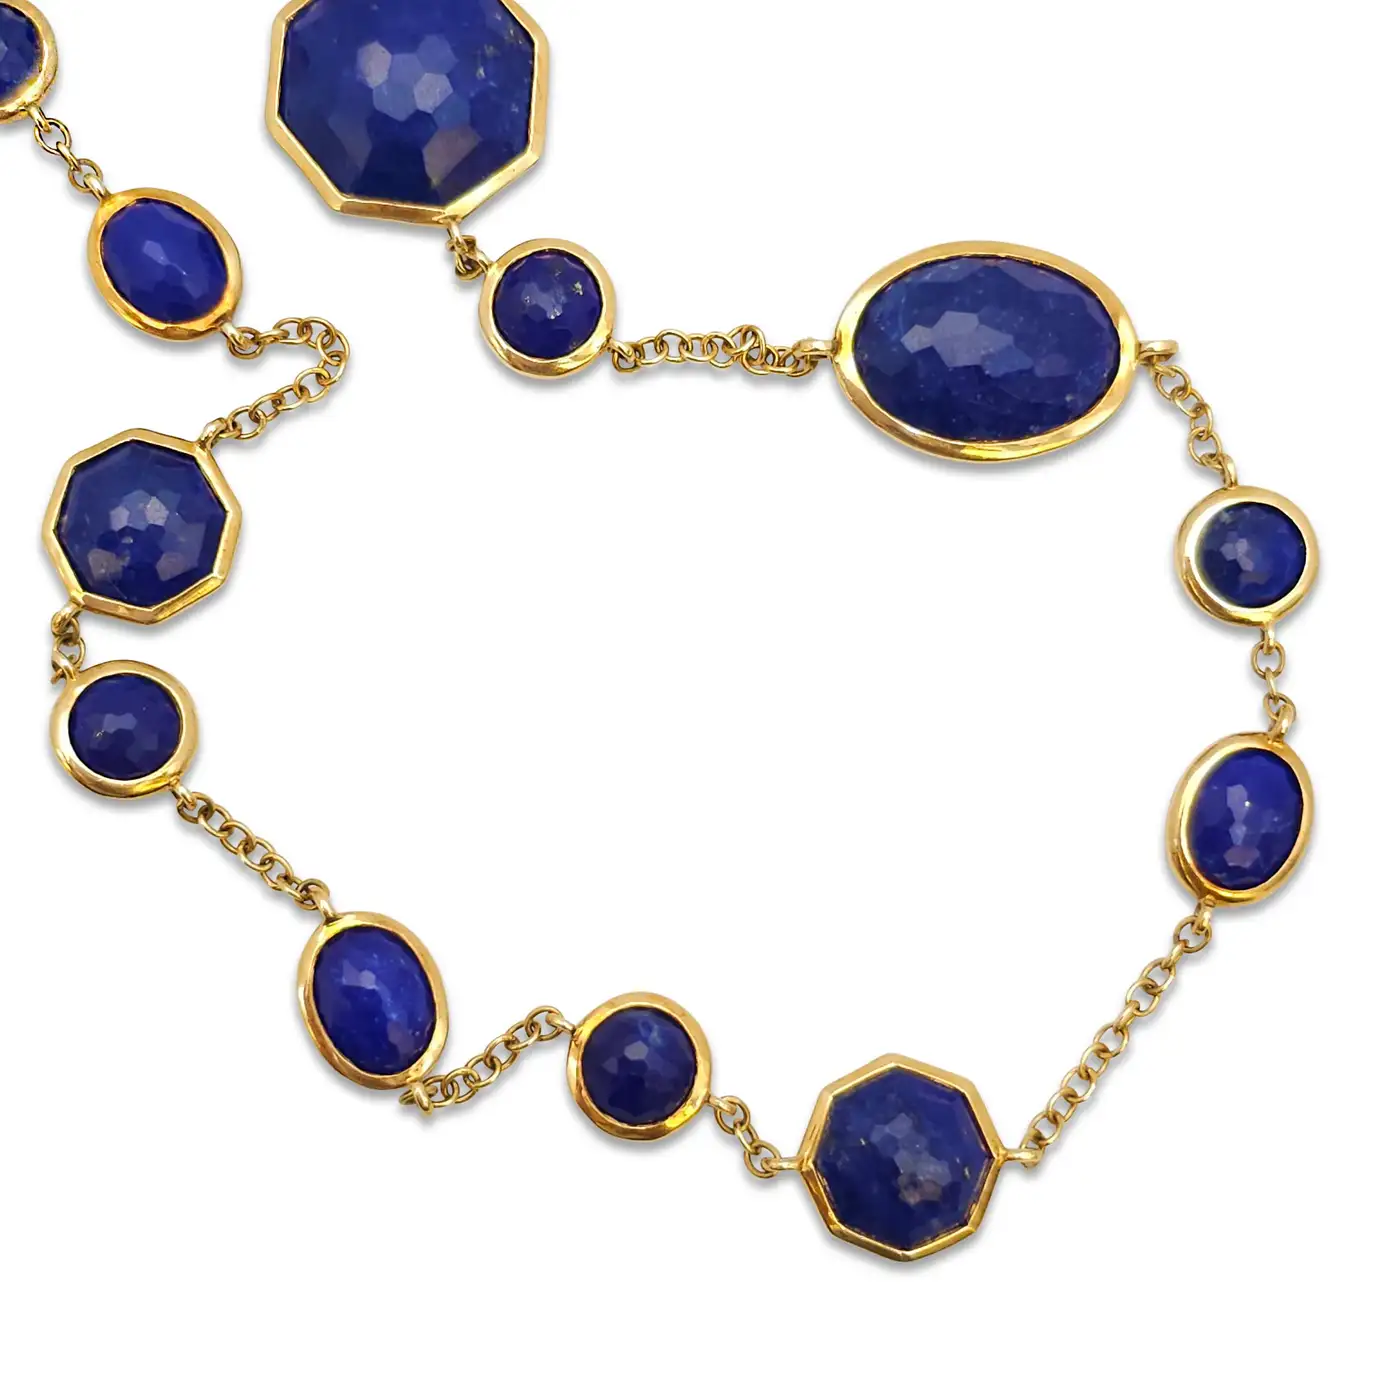 Ippolita-Rock-Sweets-Lolly-Gold-and-Lapis-Necklace-6.webp